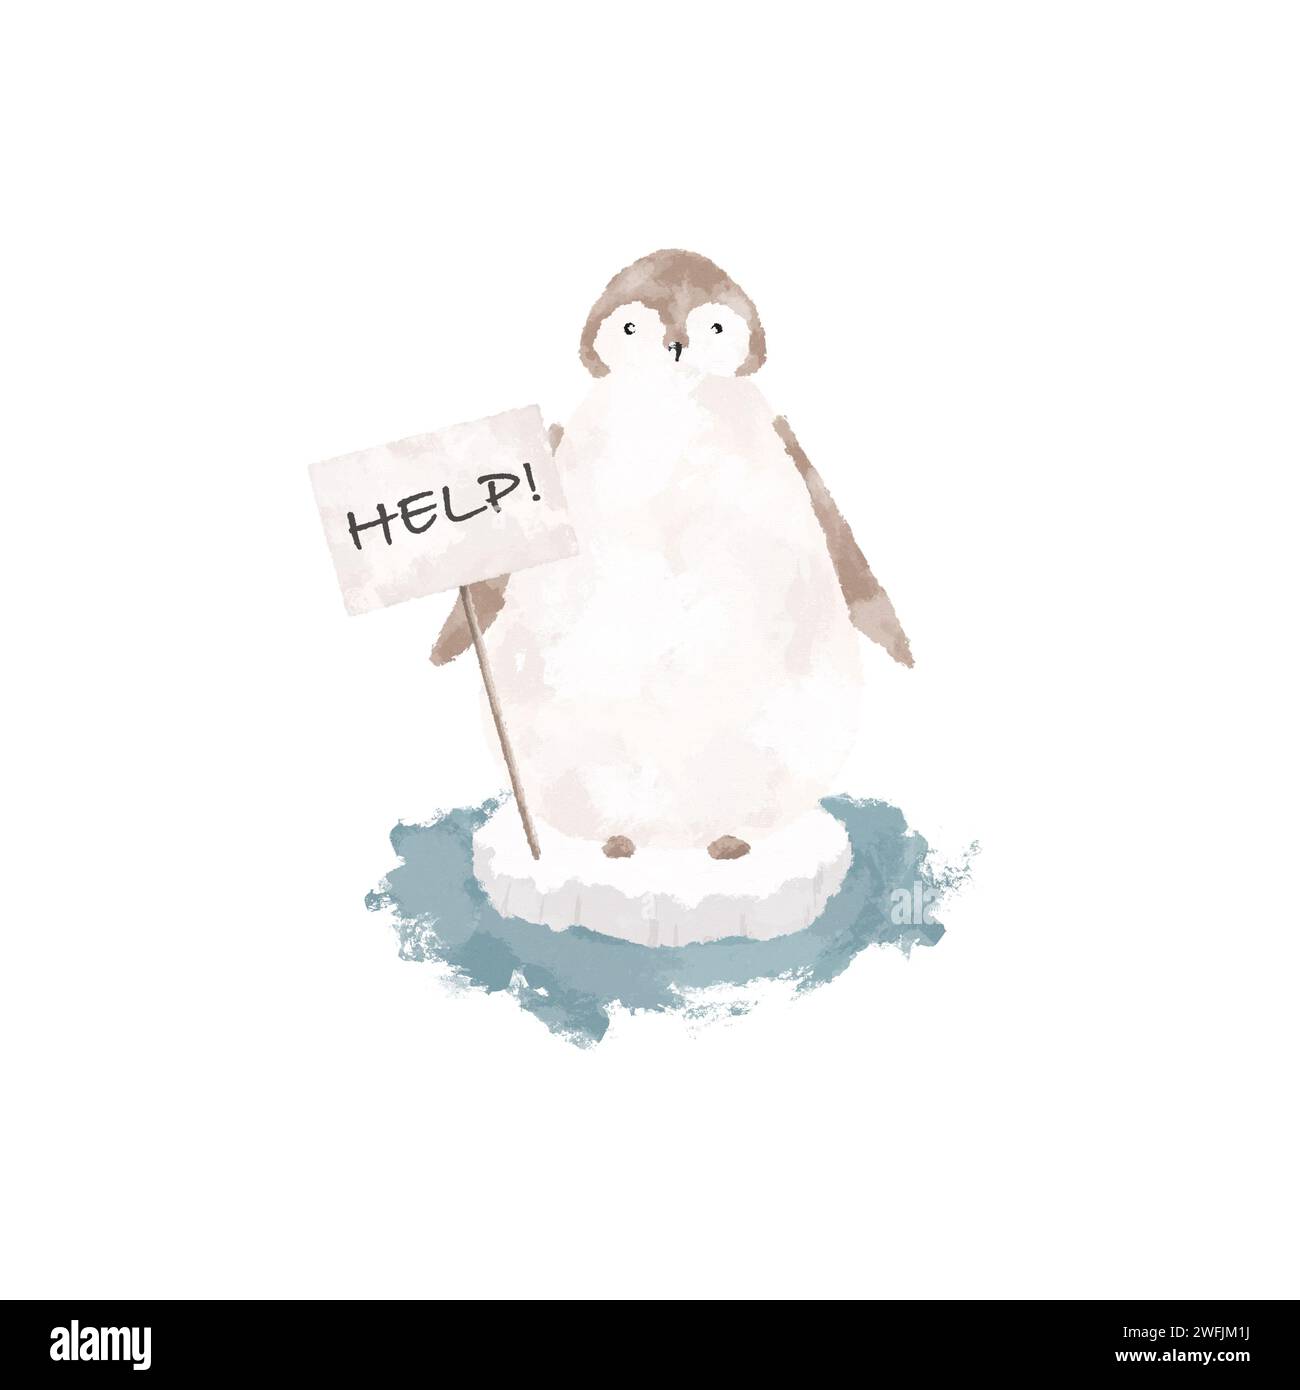 Penguin on a melting iceberg with help sign. Global warming concept. Climate change concept illustration. Environment conservation art Stock Photo